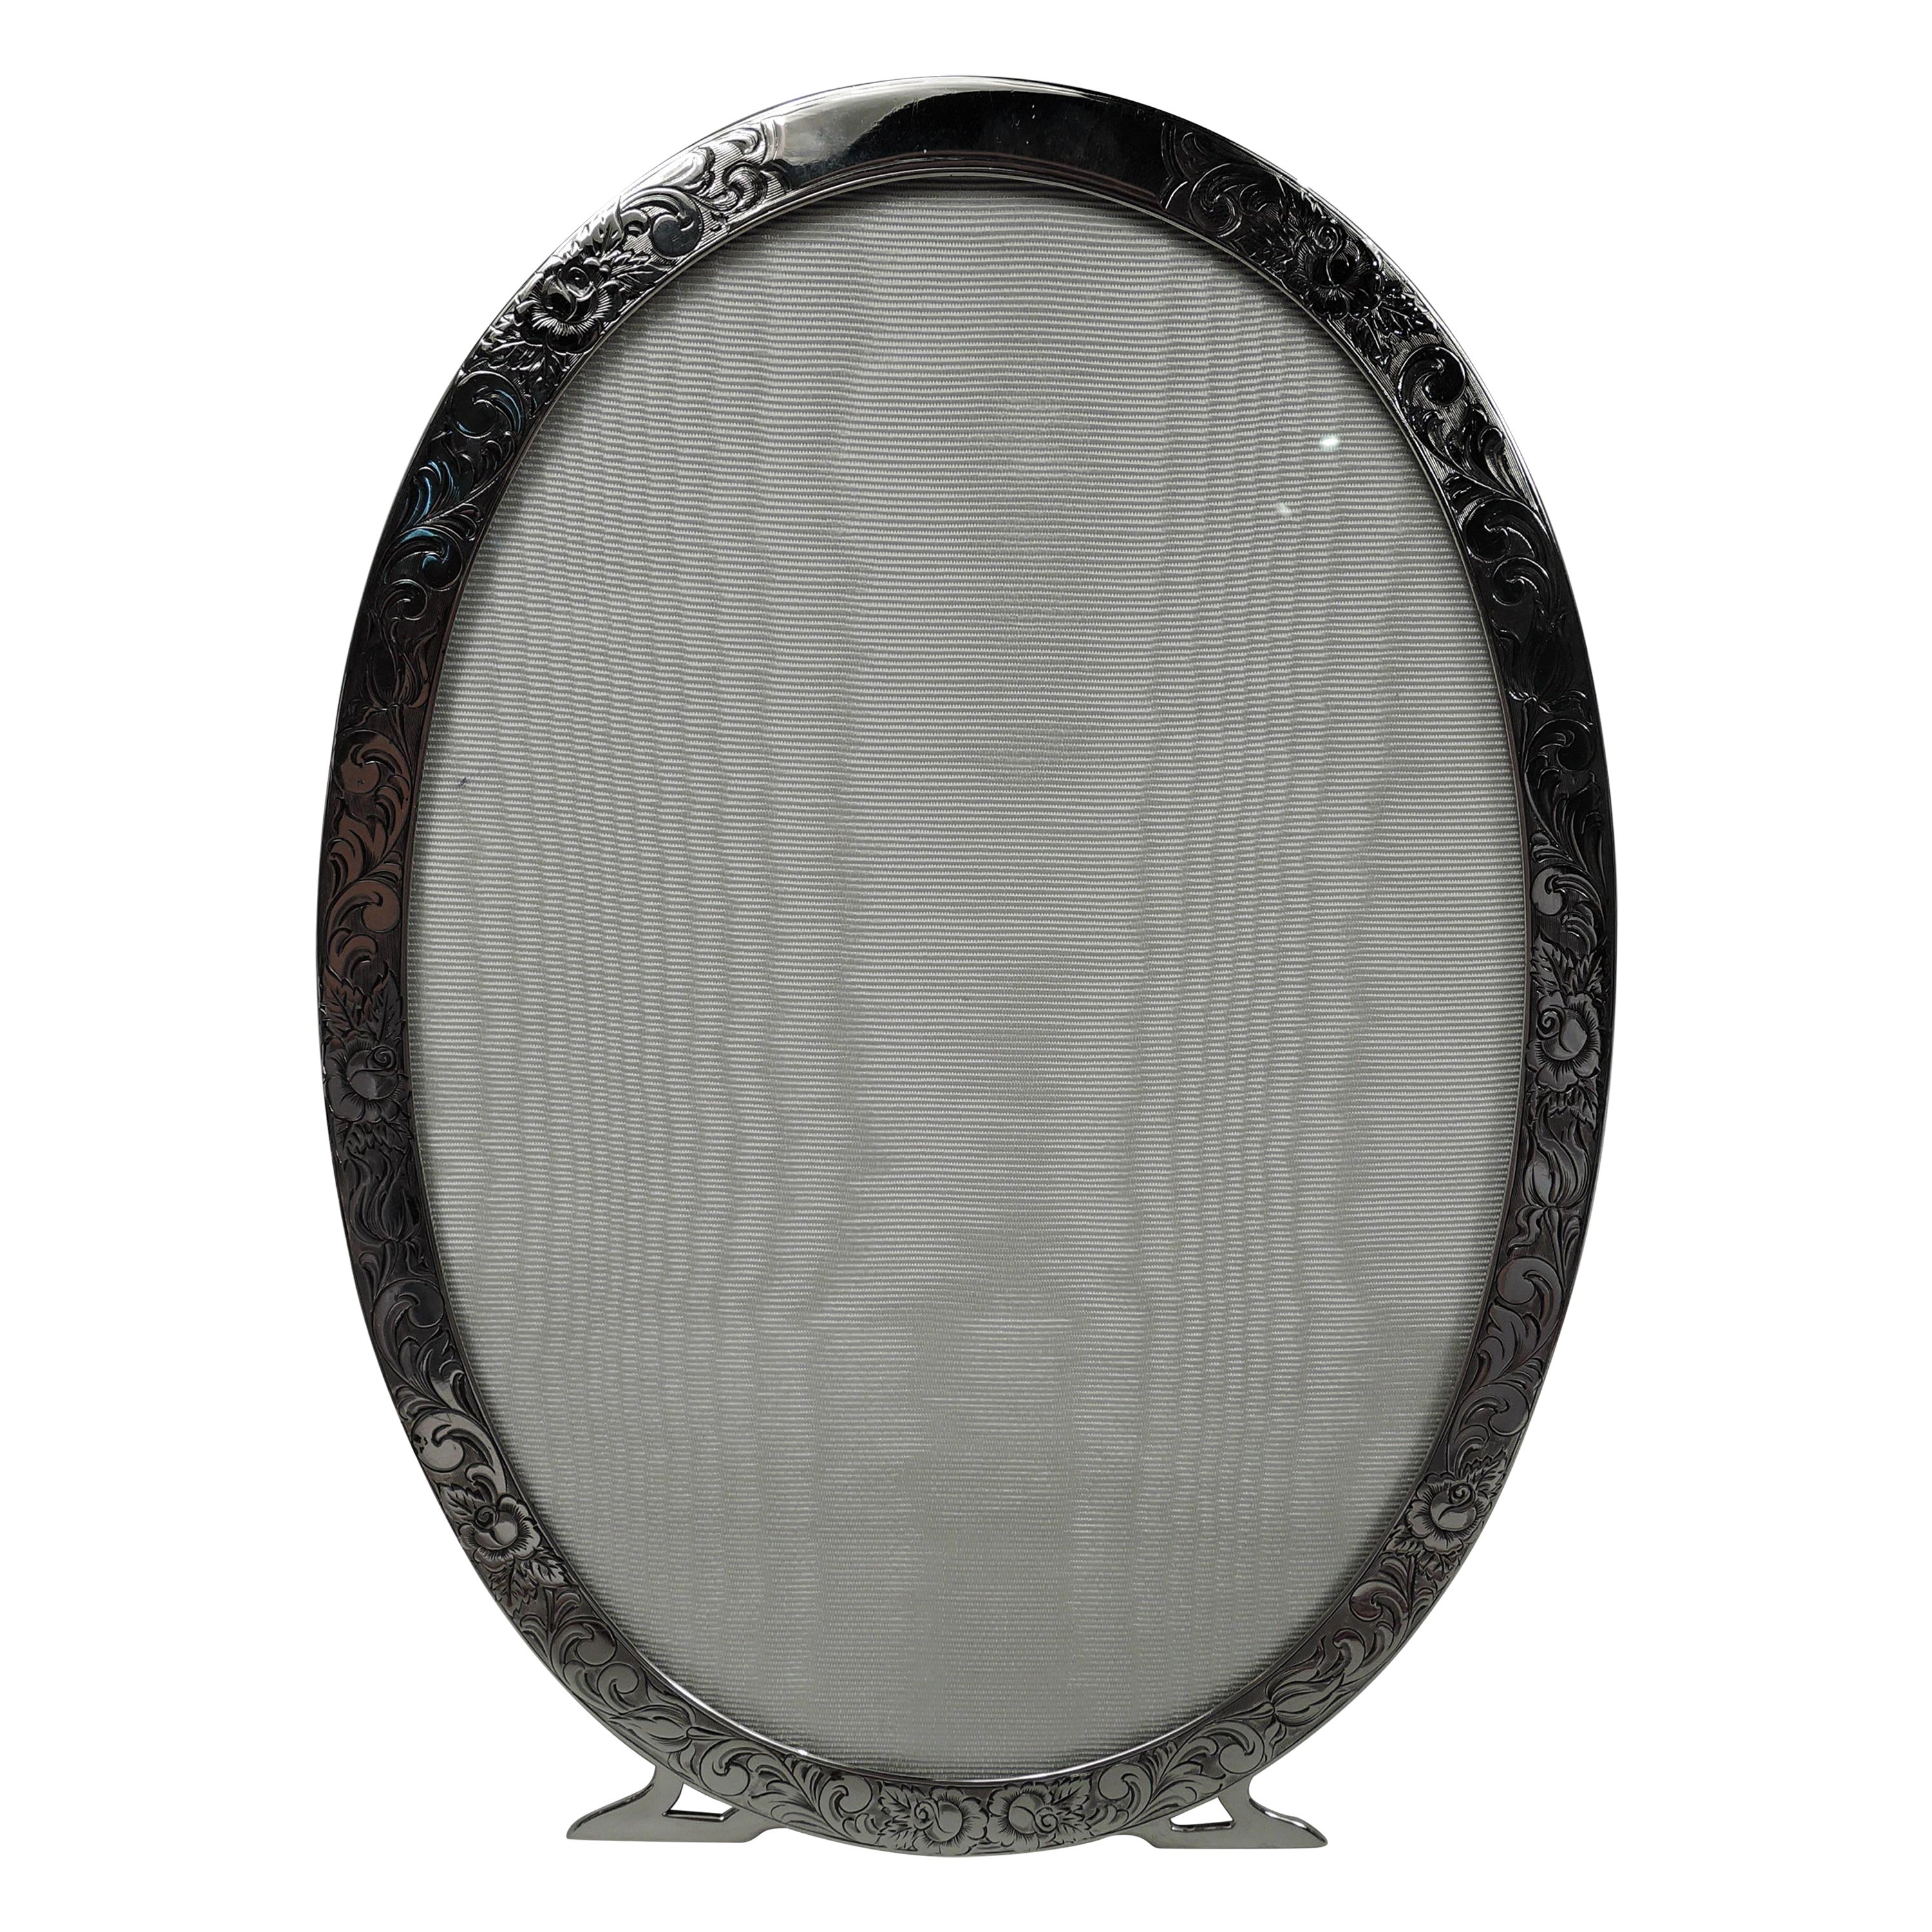 Lovely Antique American Edwardian Art Nouveau Oval Picture Frame For Sale